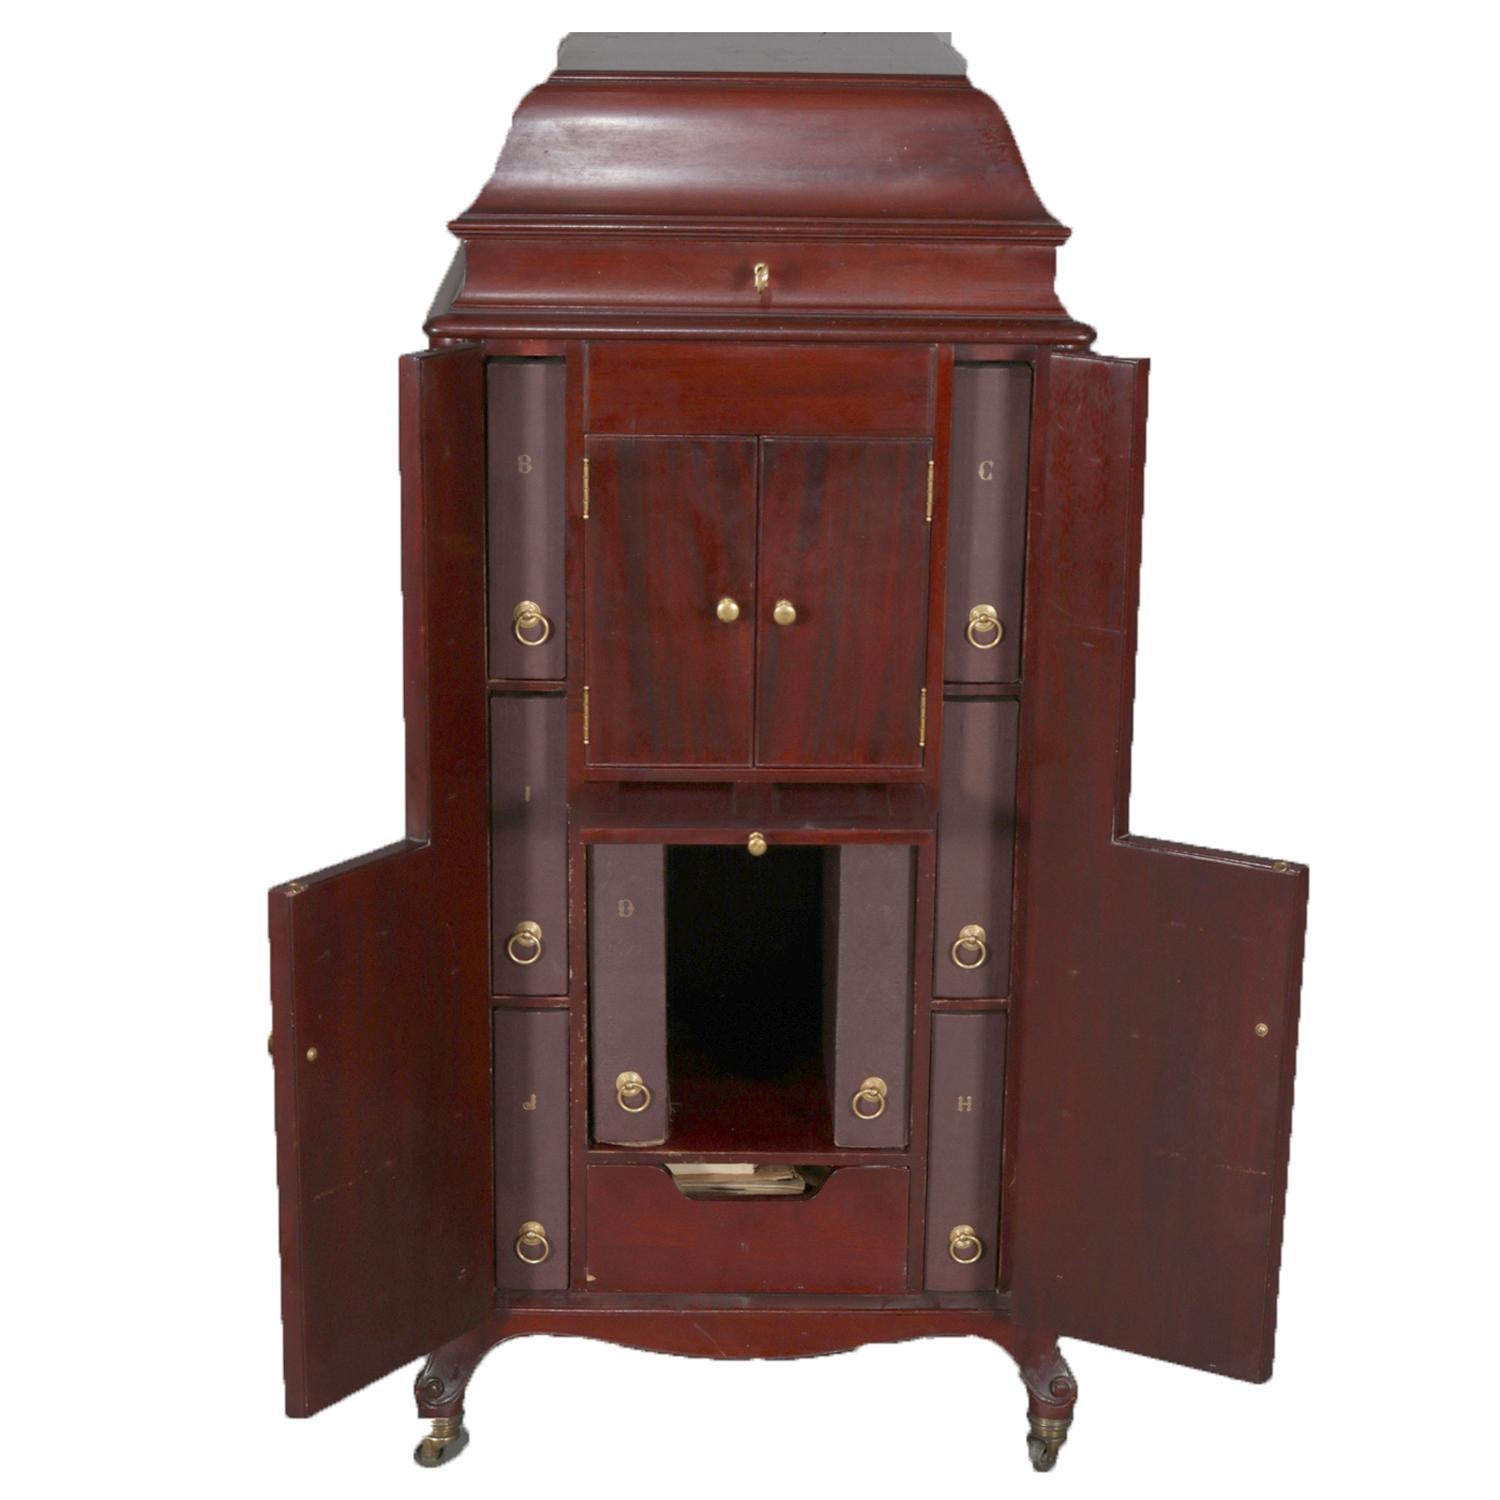 An antique Victorian floor model Victor Victrola phonograph by Victor Talking Machine Co. Camden, NJ, Model VV-XVI 16584 B, features oak case with cabinets opening to interior record storage, original labels as photographed, circa 1930.

Measures: